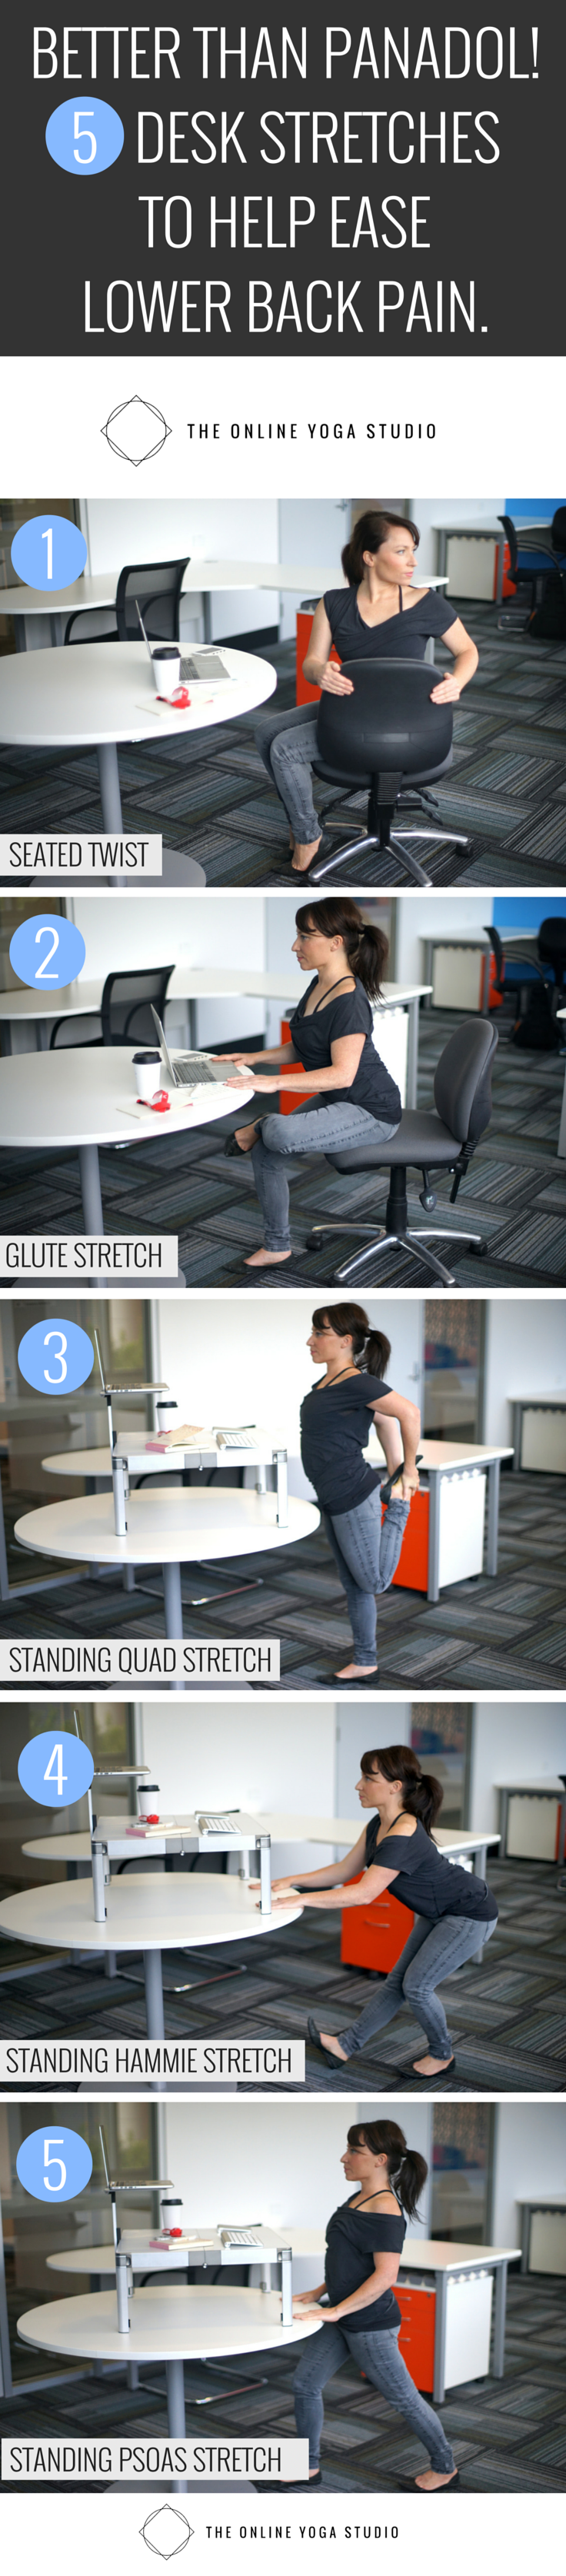 Better Than Panadol 5 Simple Desk Stretches To Help Ease Lower